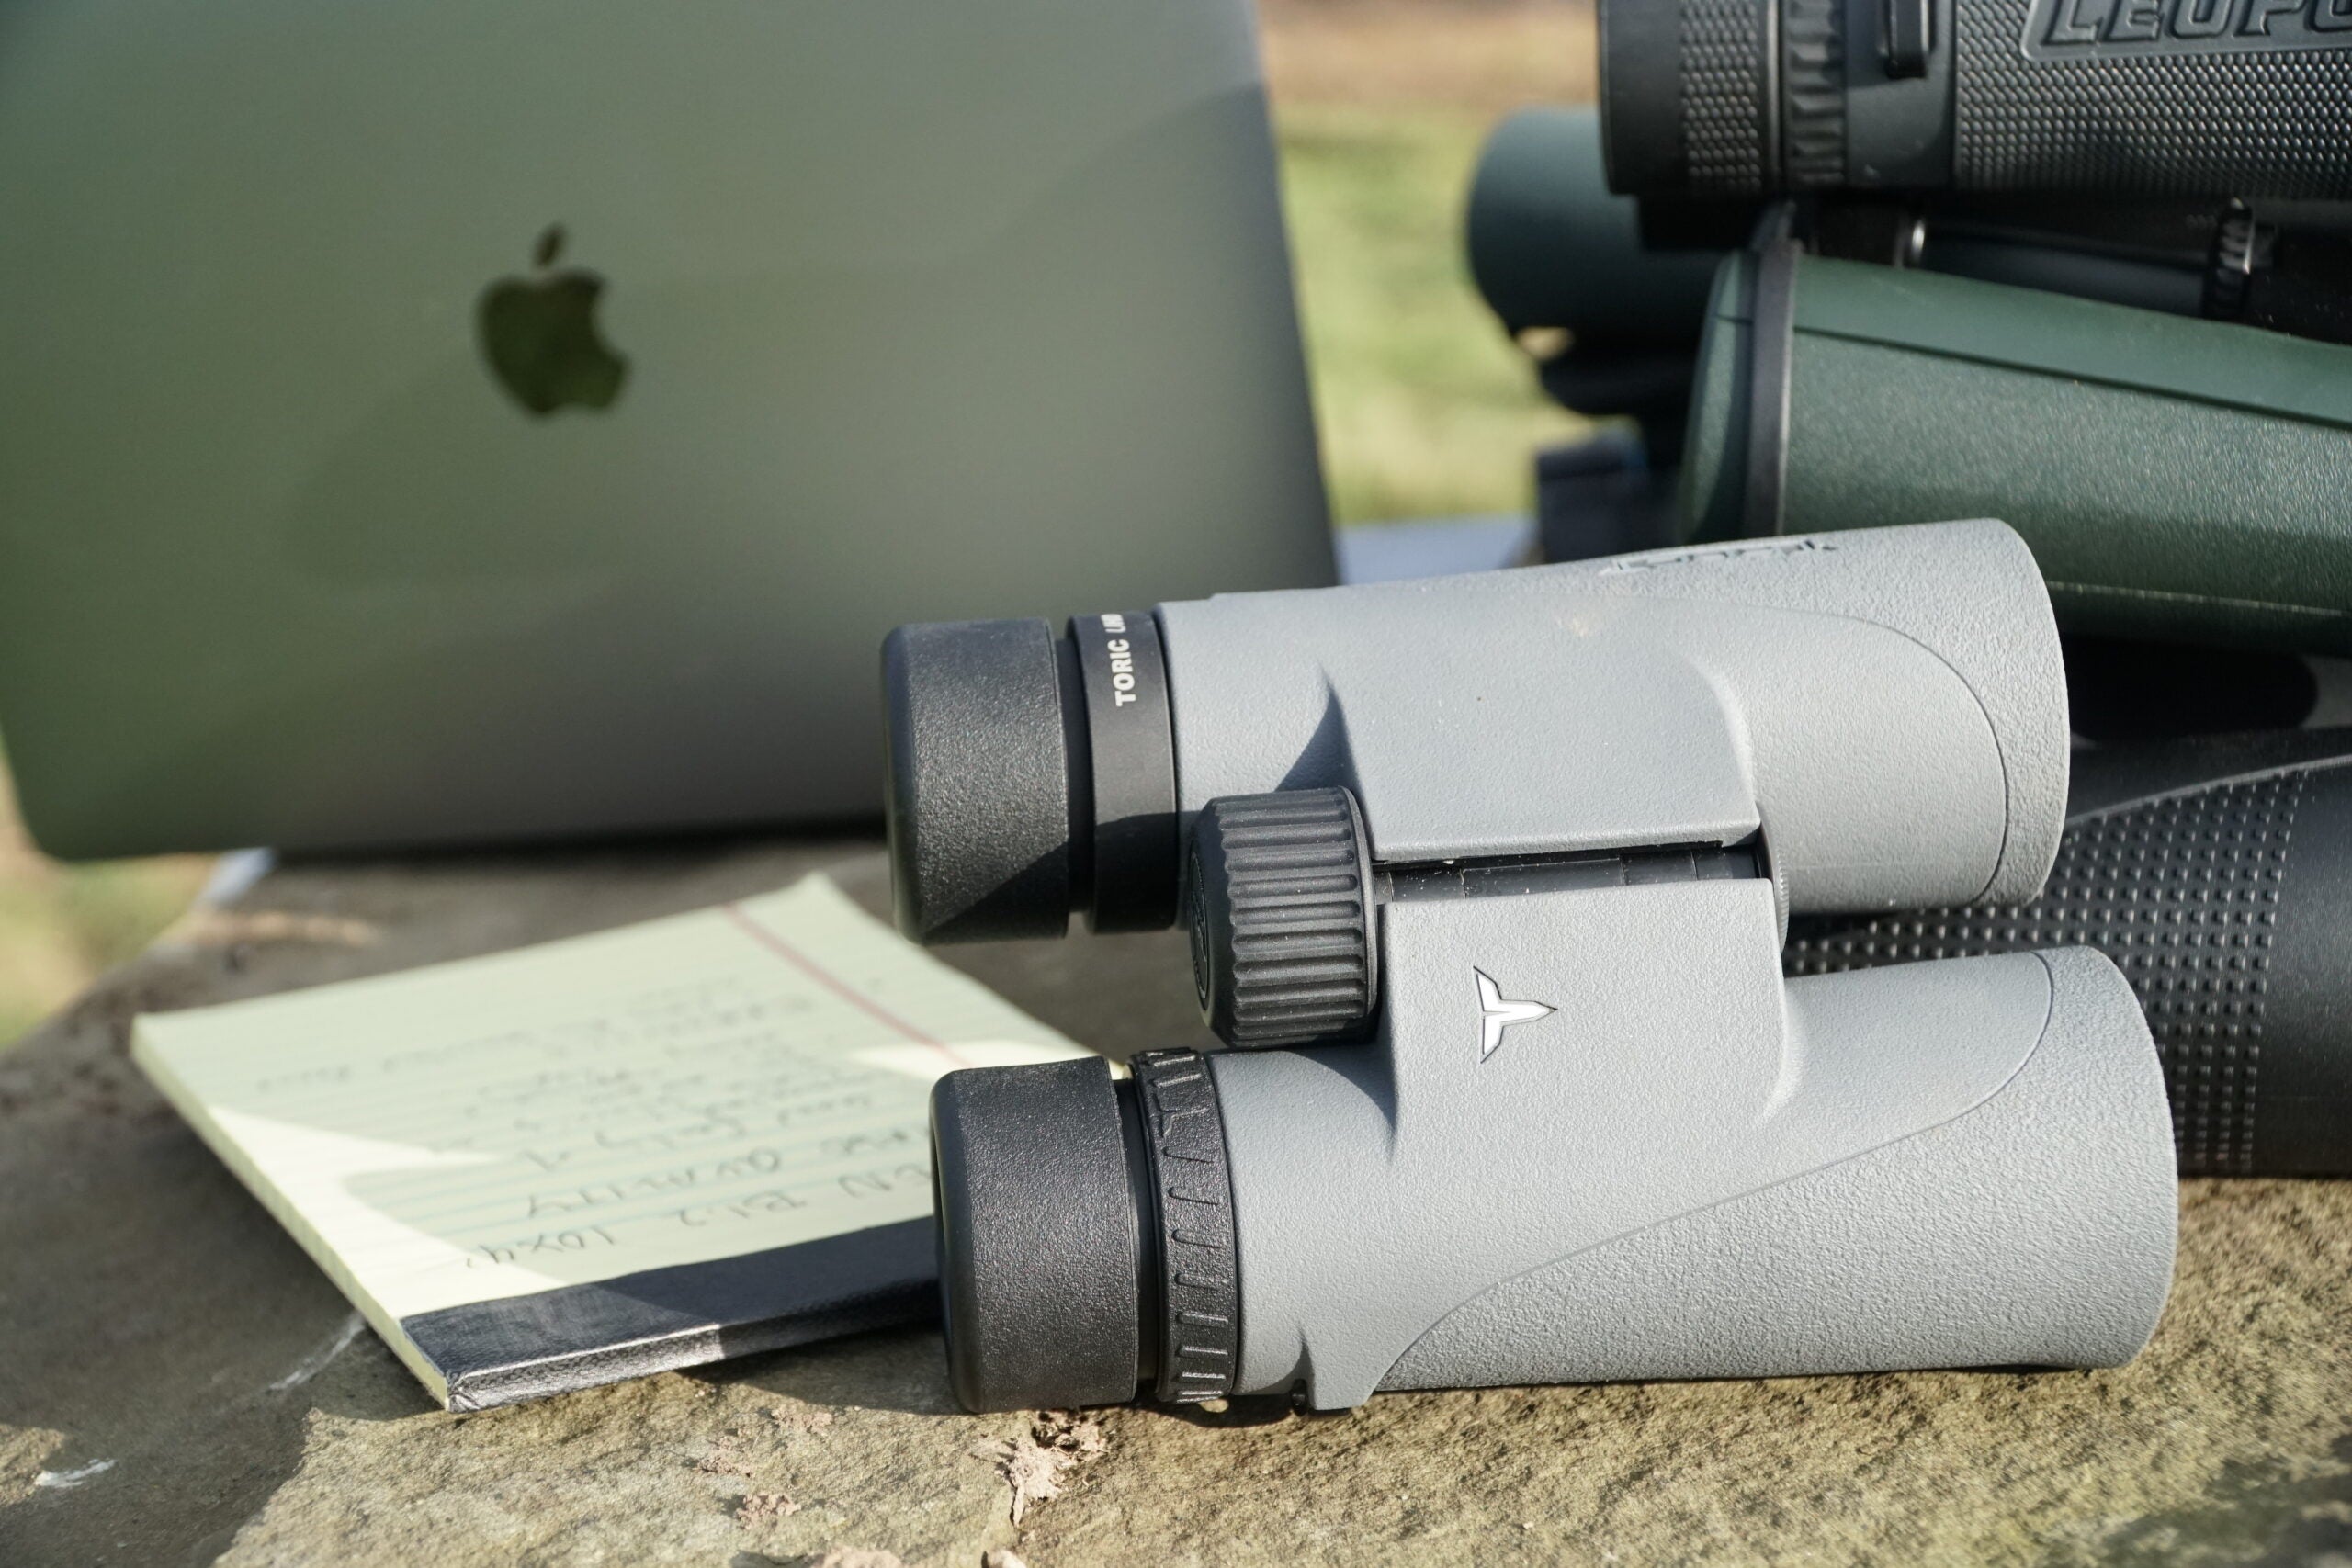 Tract Toric UHD 10x42 binocular sitting on talbe with computer and note pad.